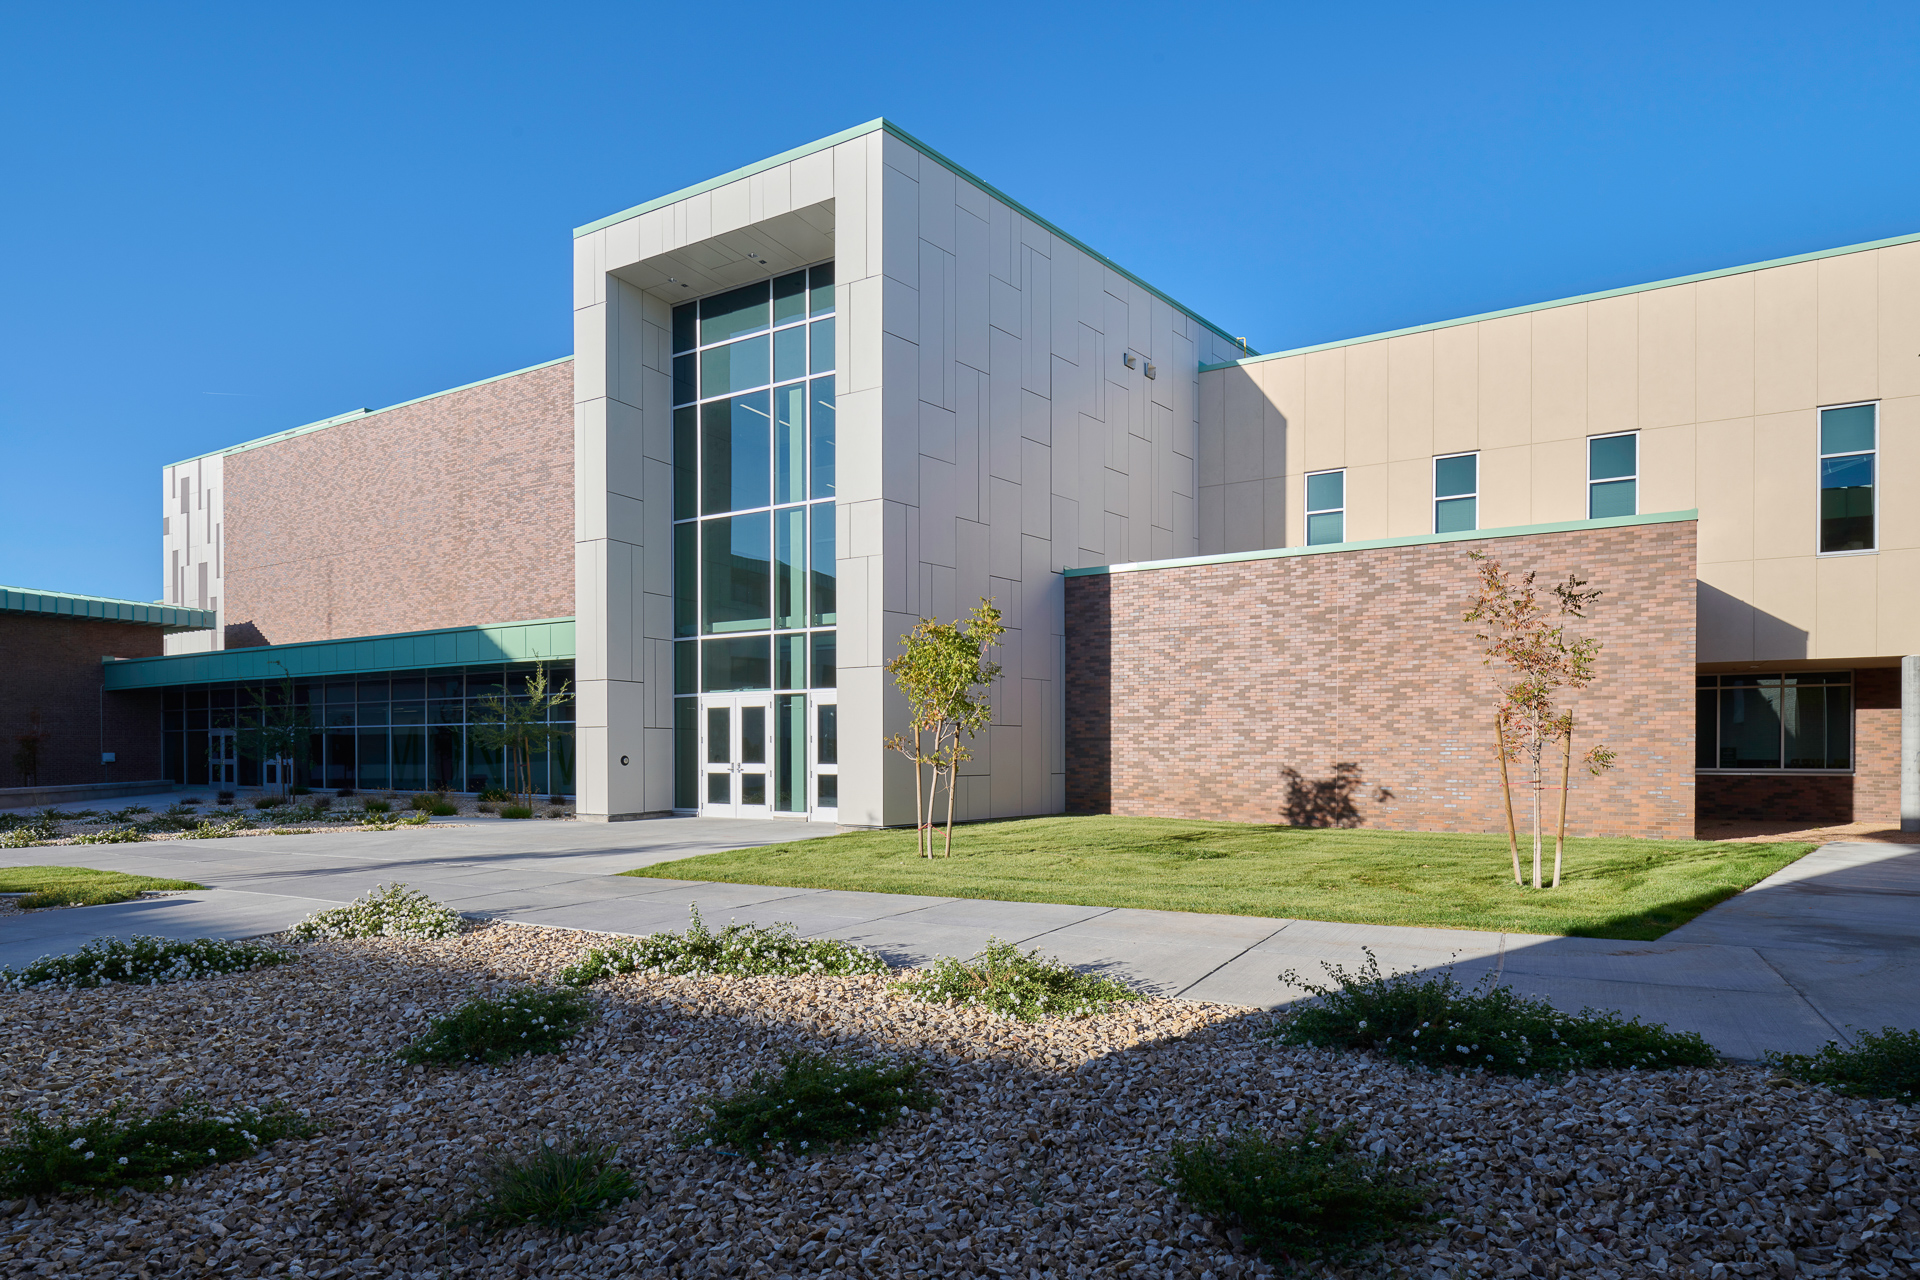 Architectural Photography of Montwood High School in El Paso, Texas